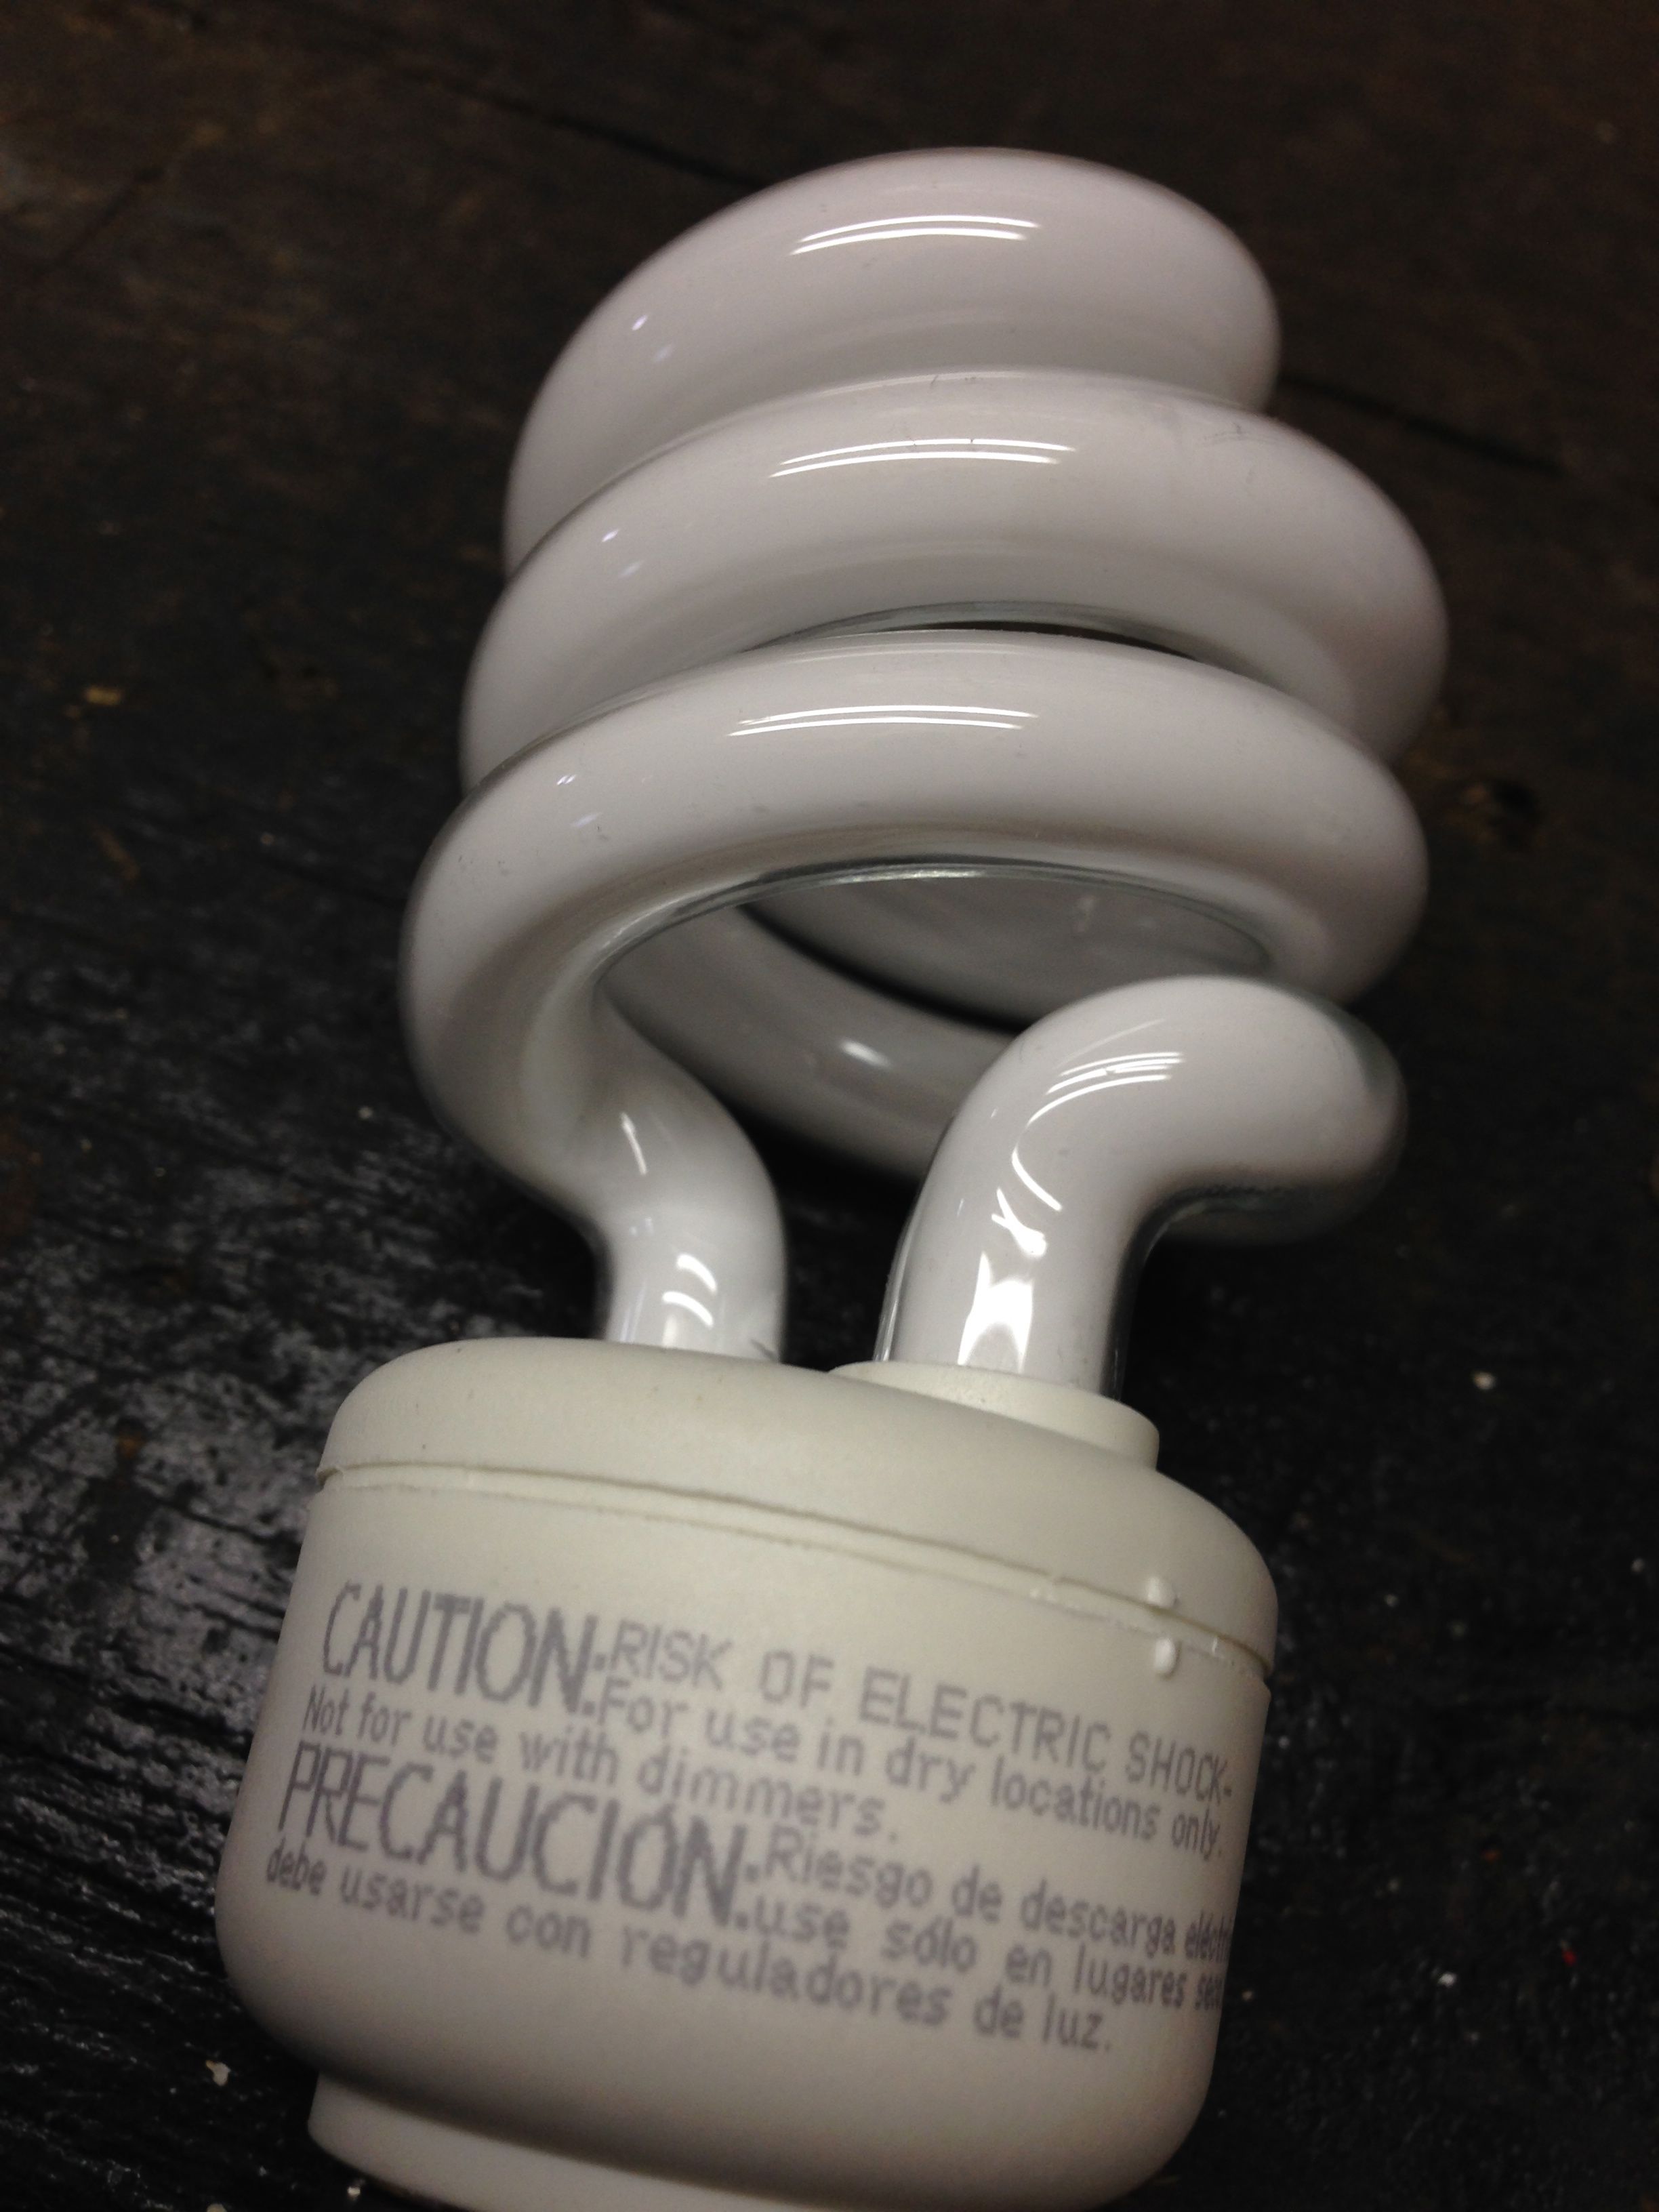 Cfl Bulbs Contain Mercury What About